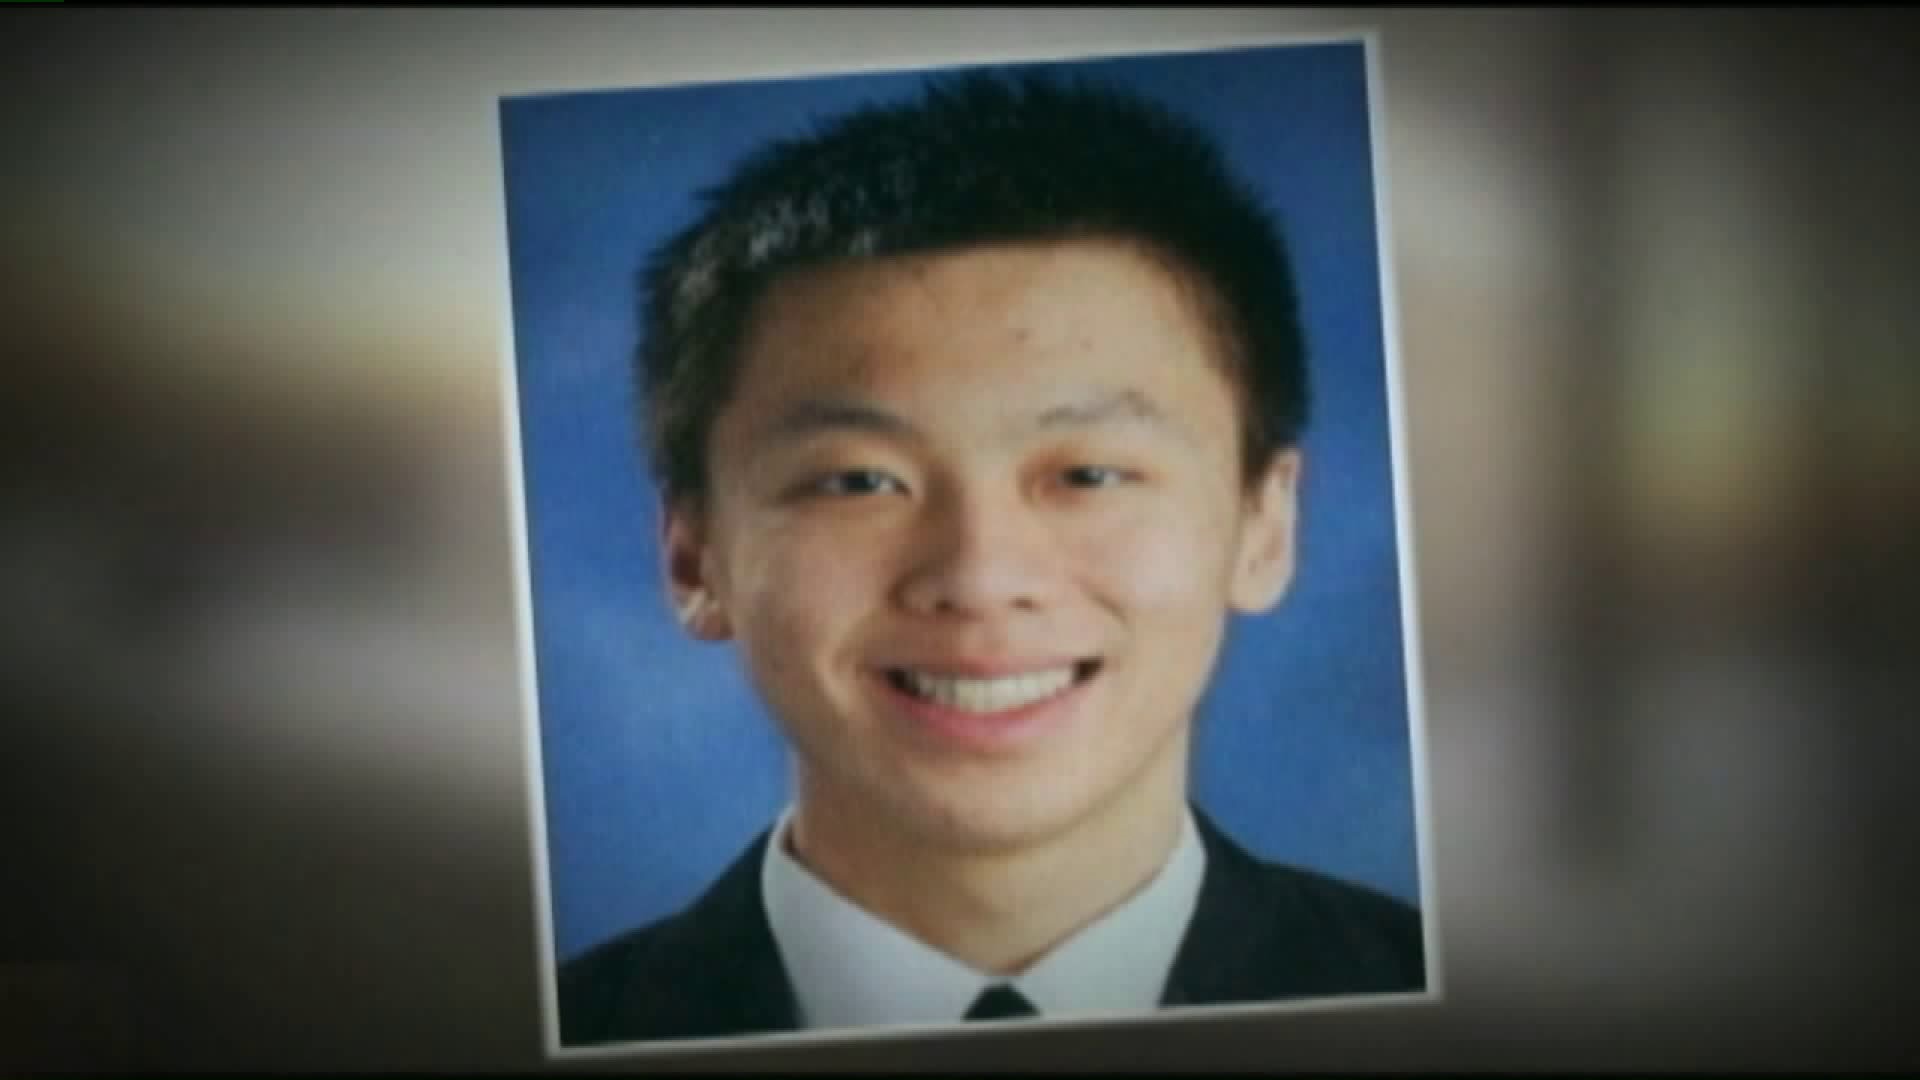 Four Fraternity Brothers Plead Guilty for Pledge's Death in Hazing Ritual